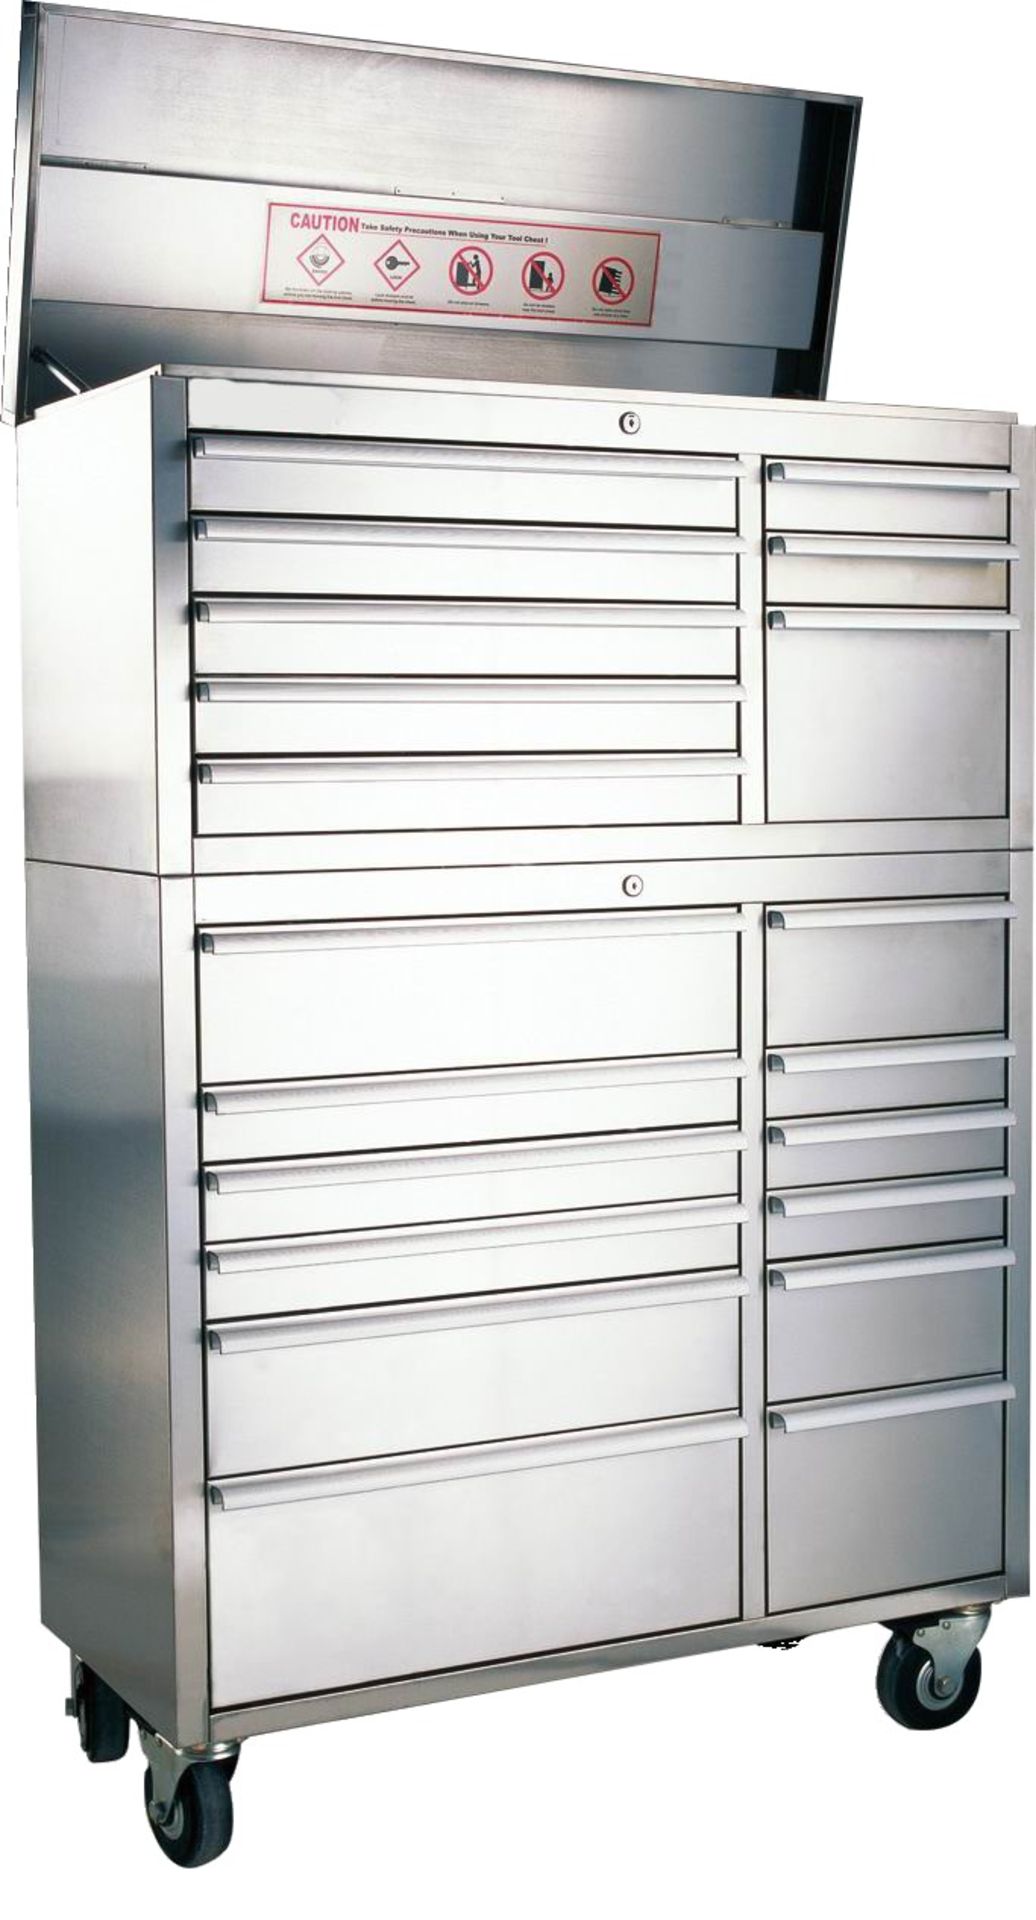 42 inch 20 draw stainless steel storage unit 1056mm W x 1550mm H 460mm D NEW and BOXED Includes: